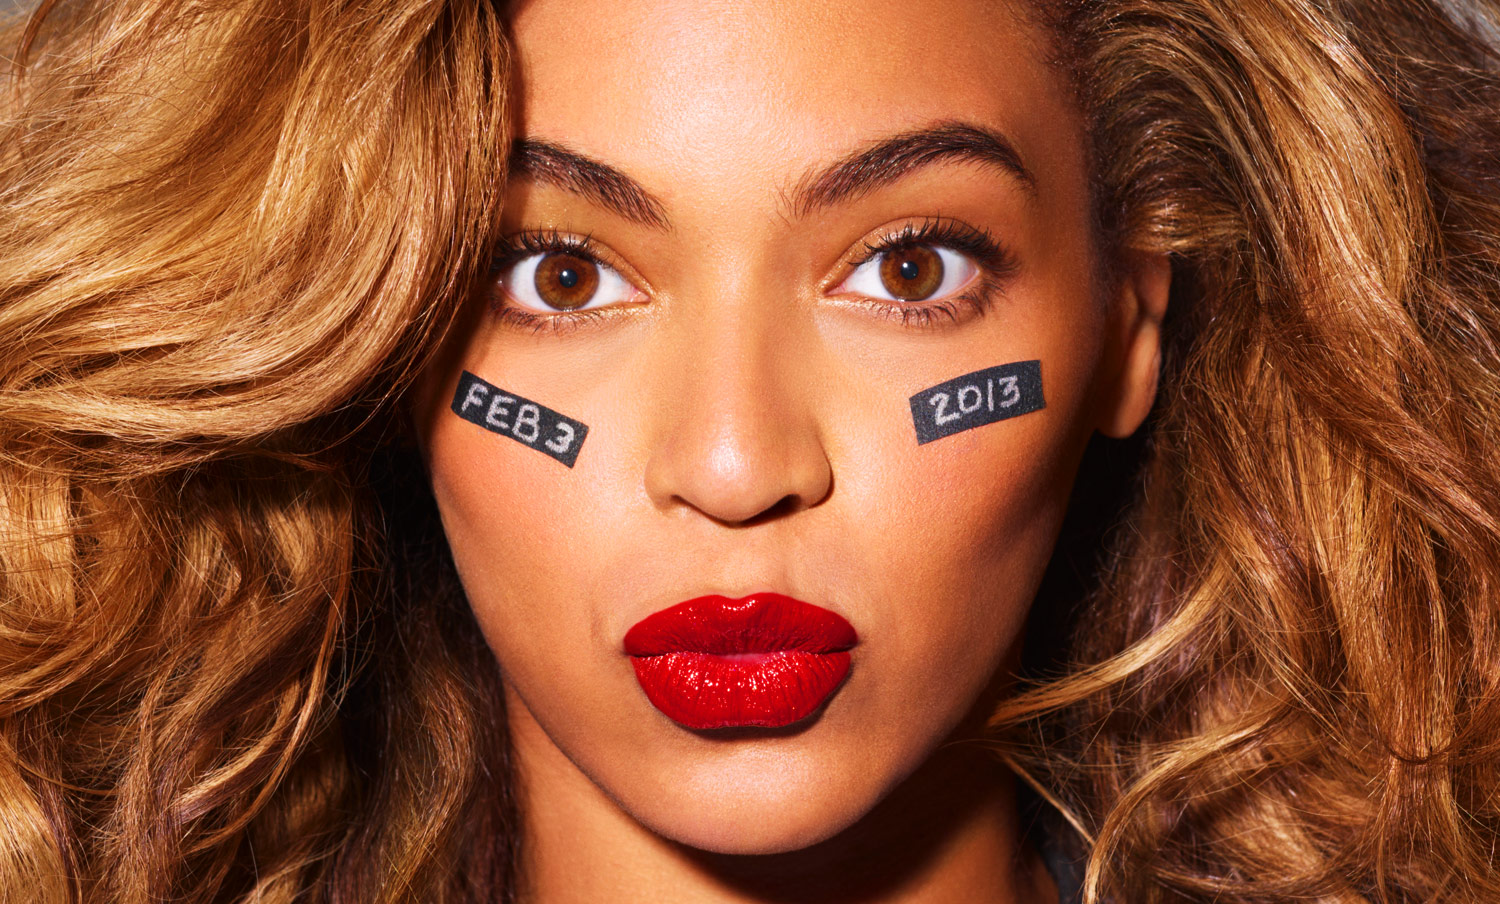 Download Beyonce Super Bowl background for your phone iPhone